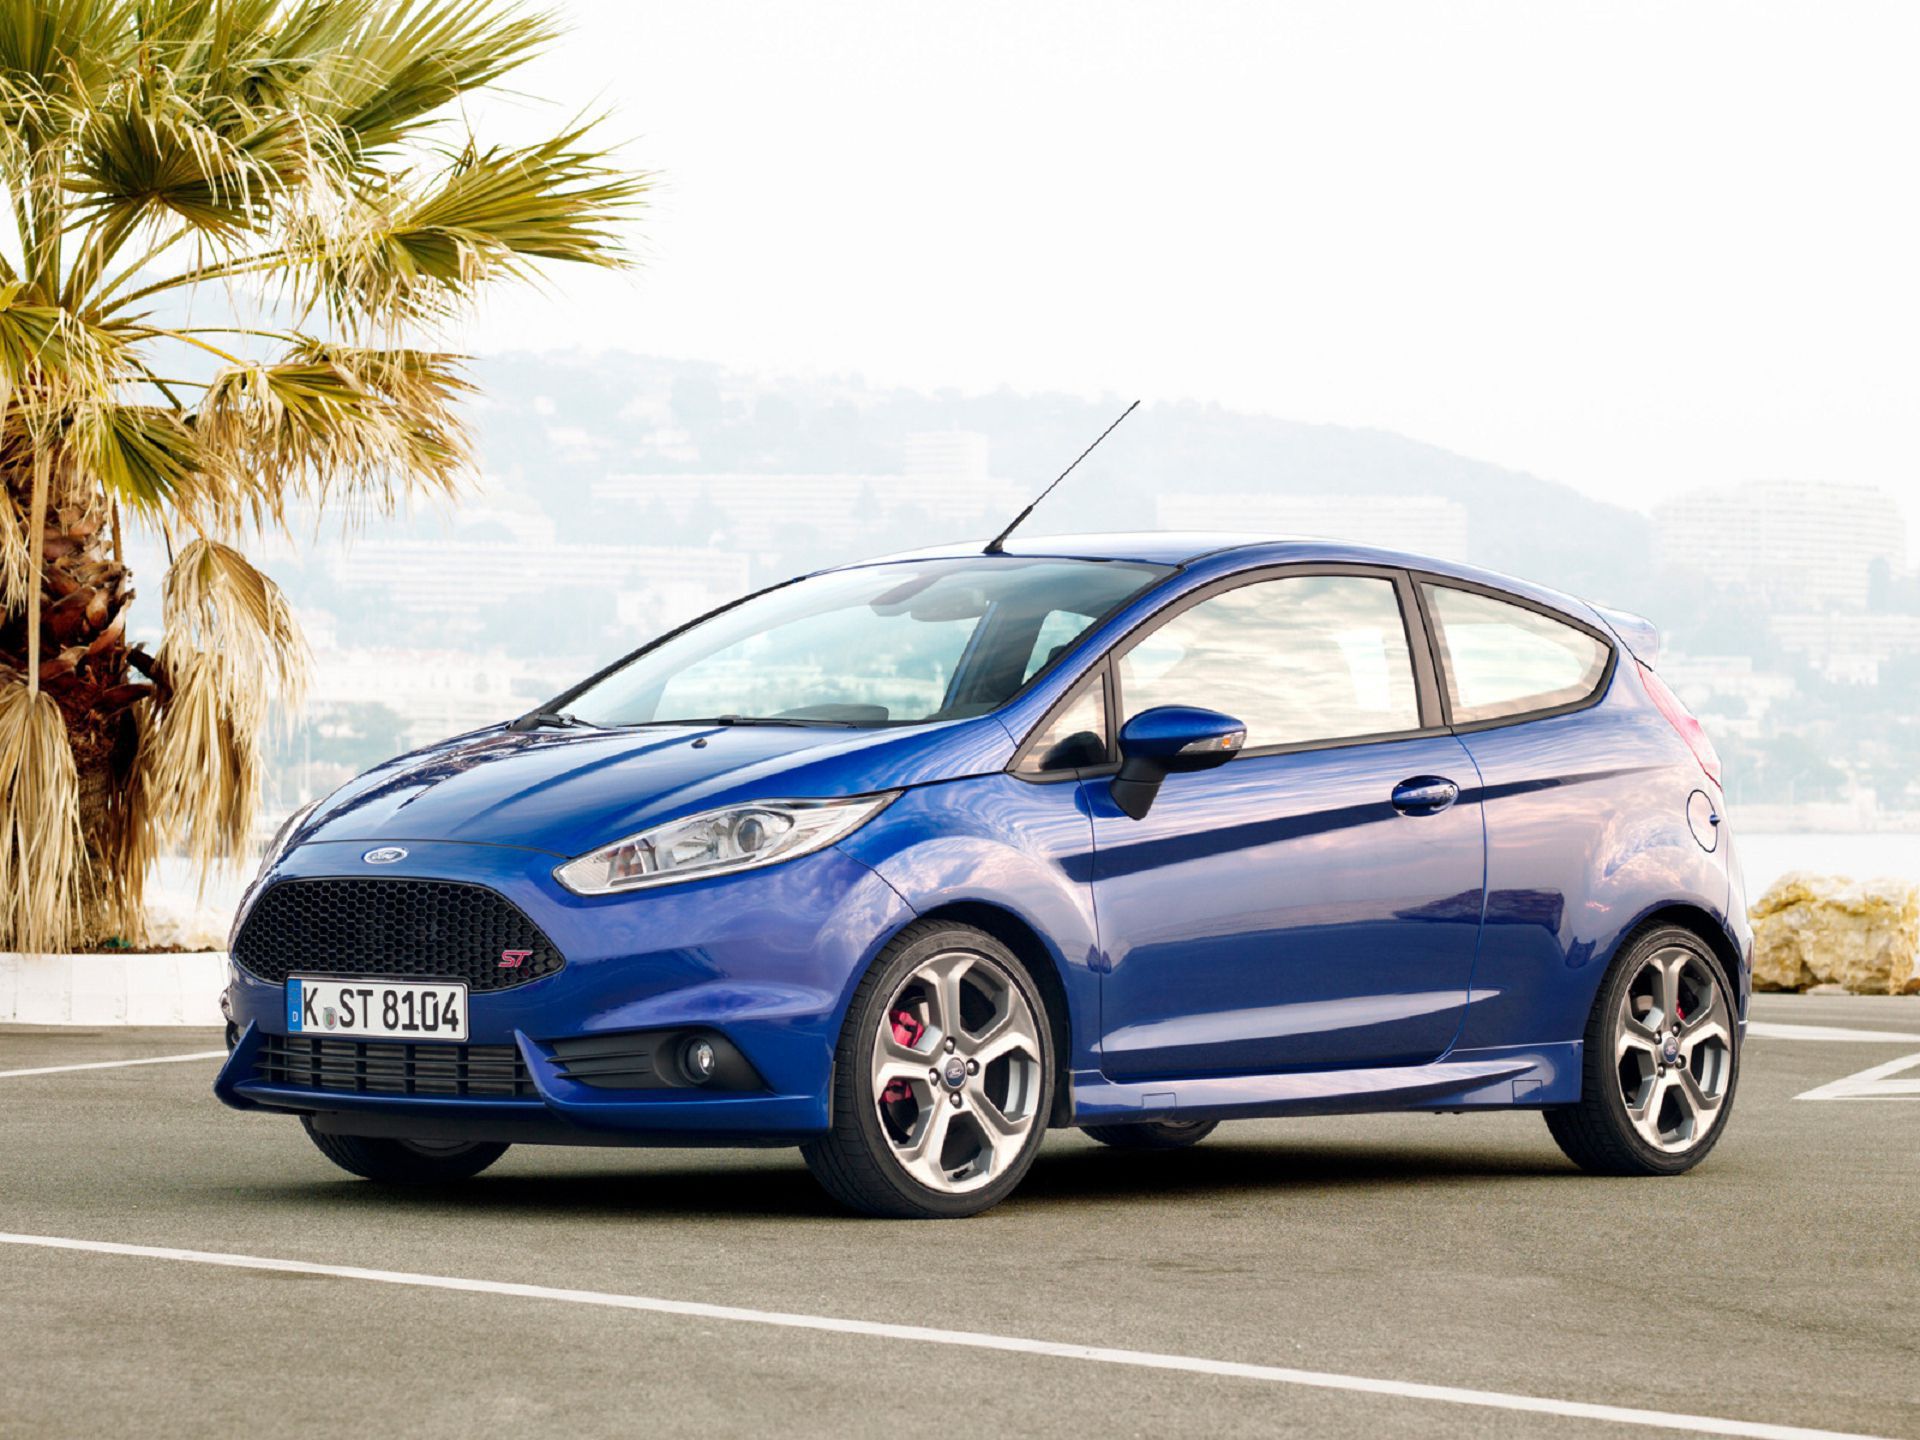 Ford Fiesta St Wallpaper Image Photos Pictures Background